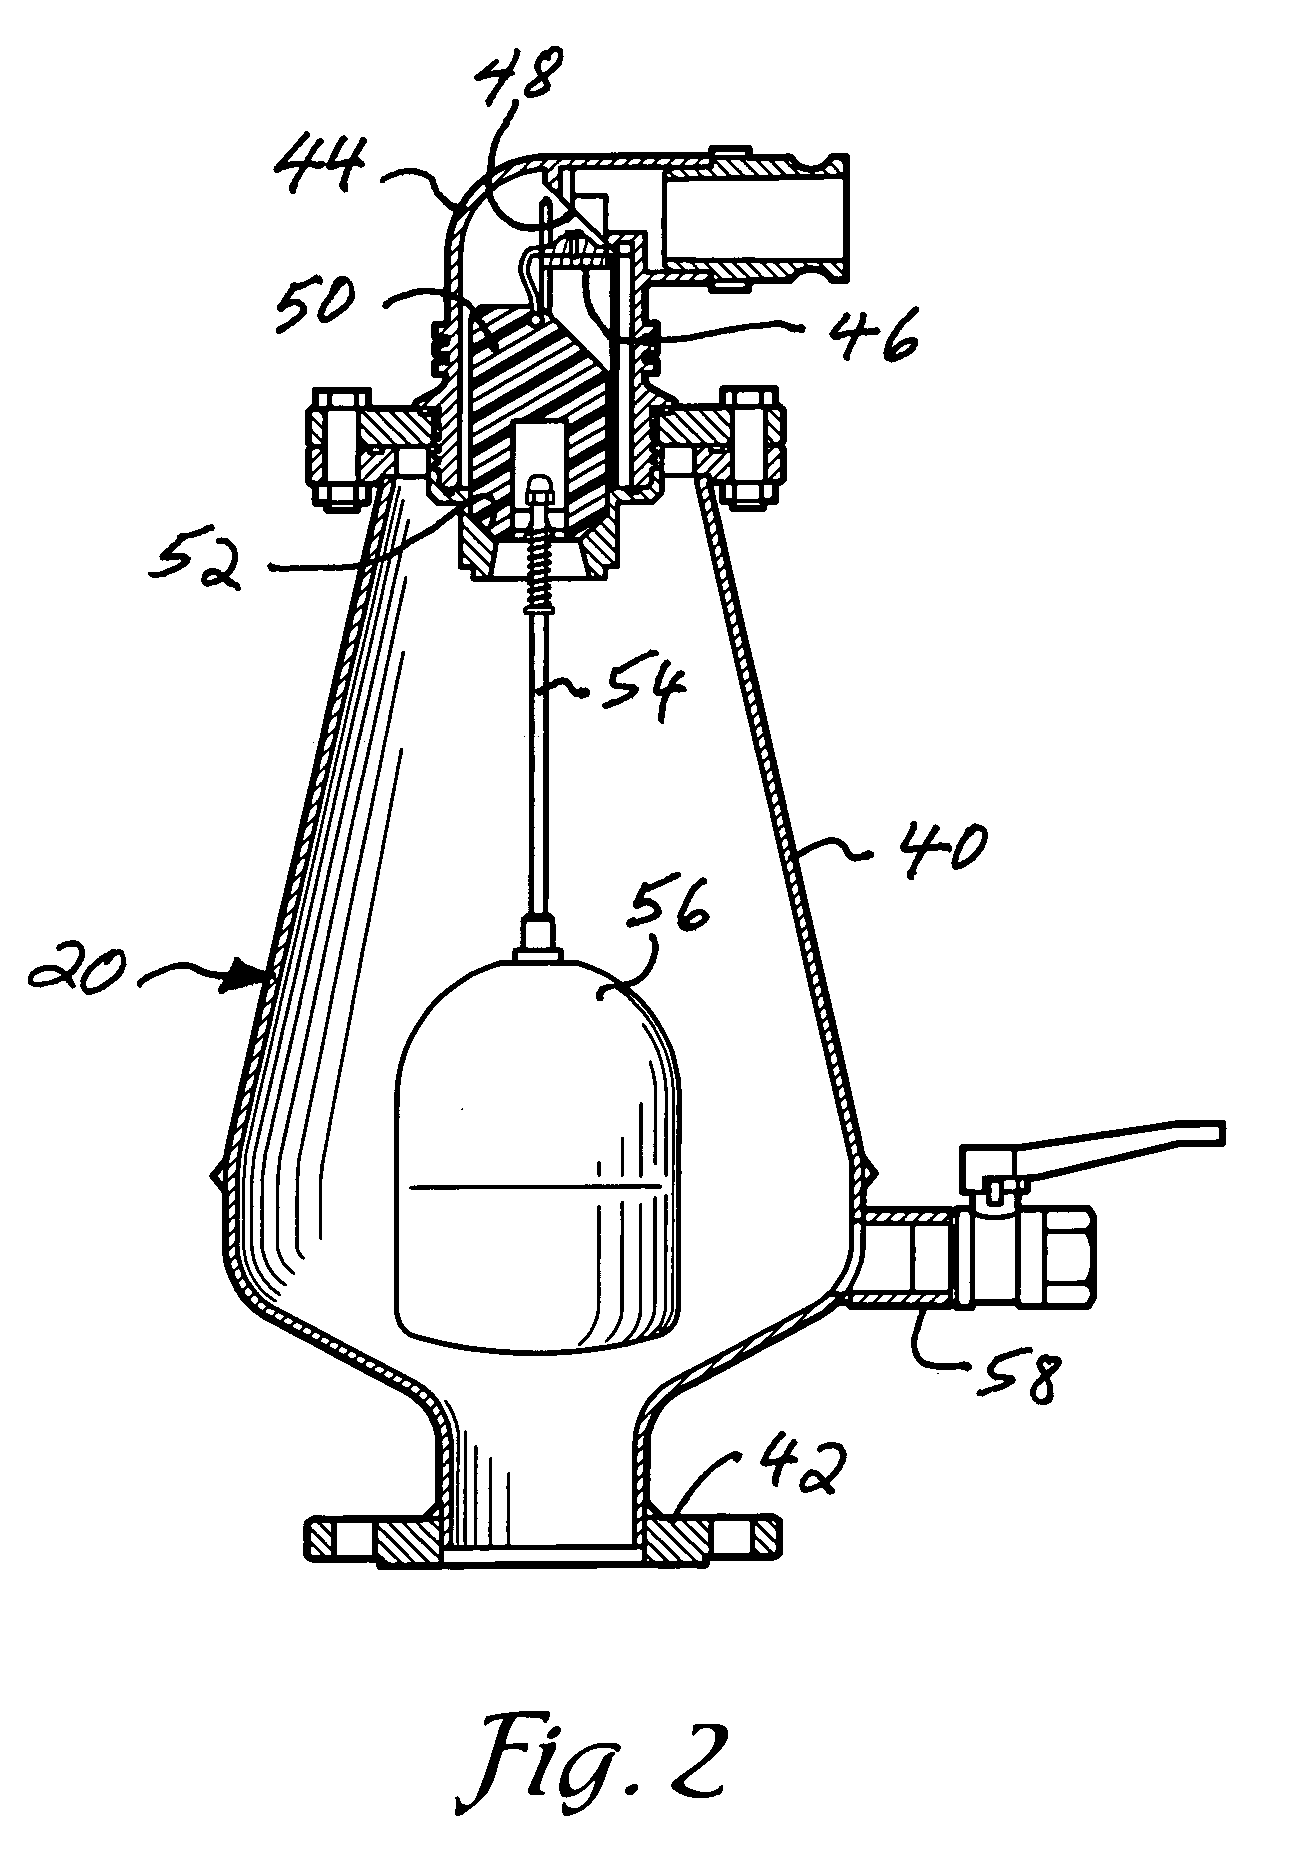 Sewer pipe gas exhaust filter apparatus